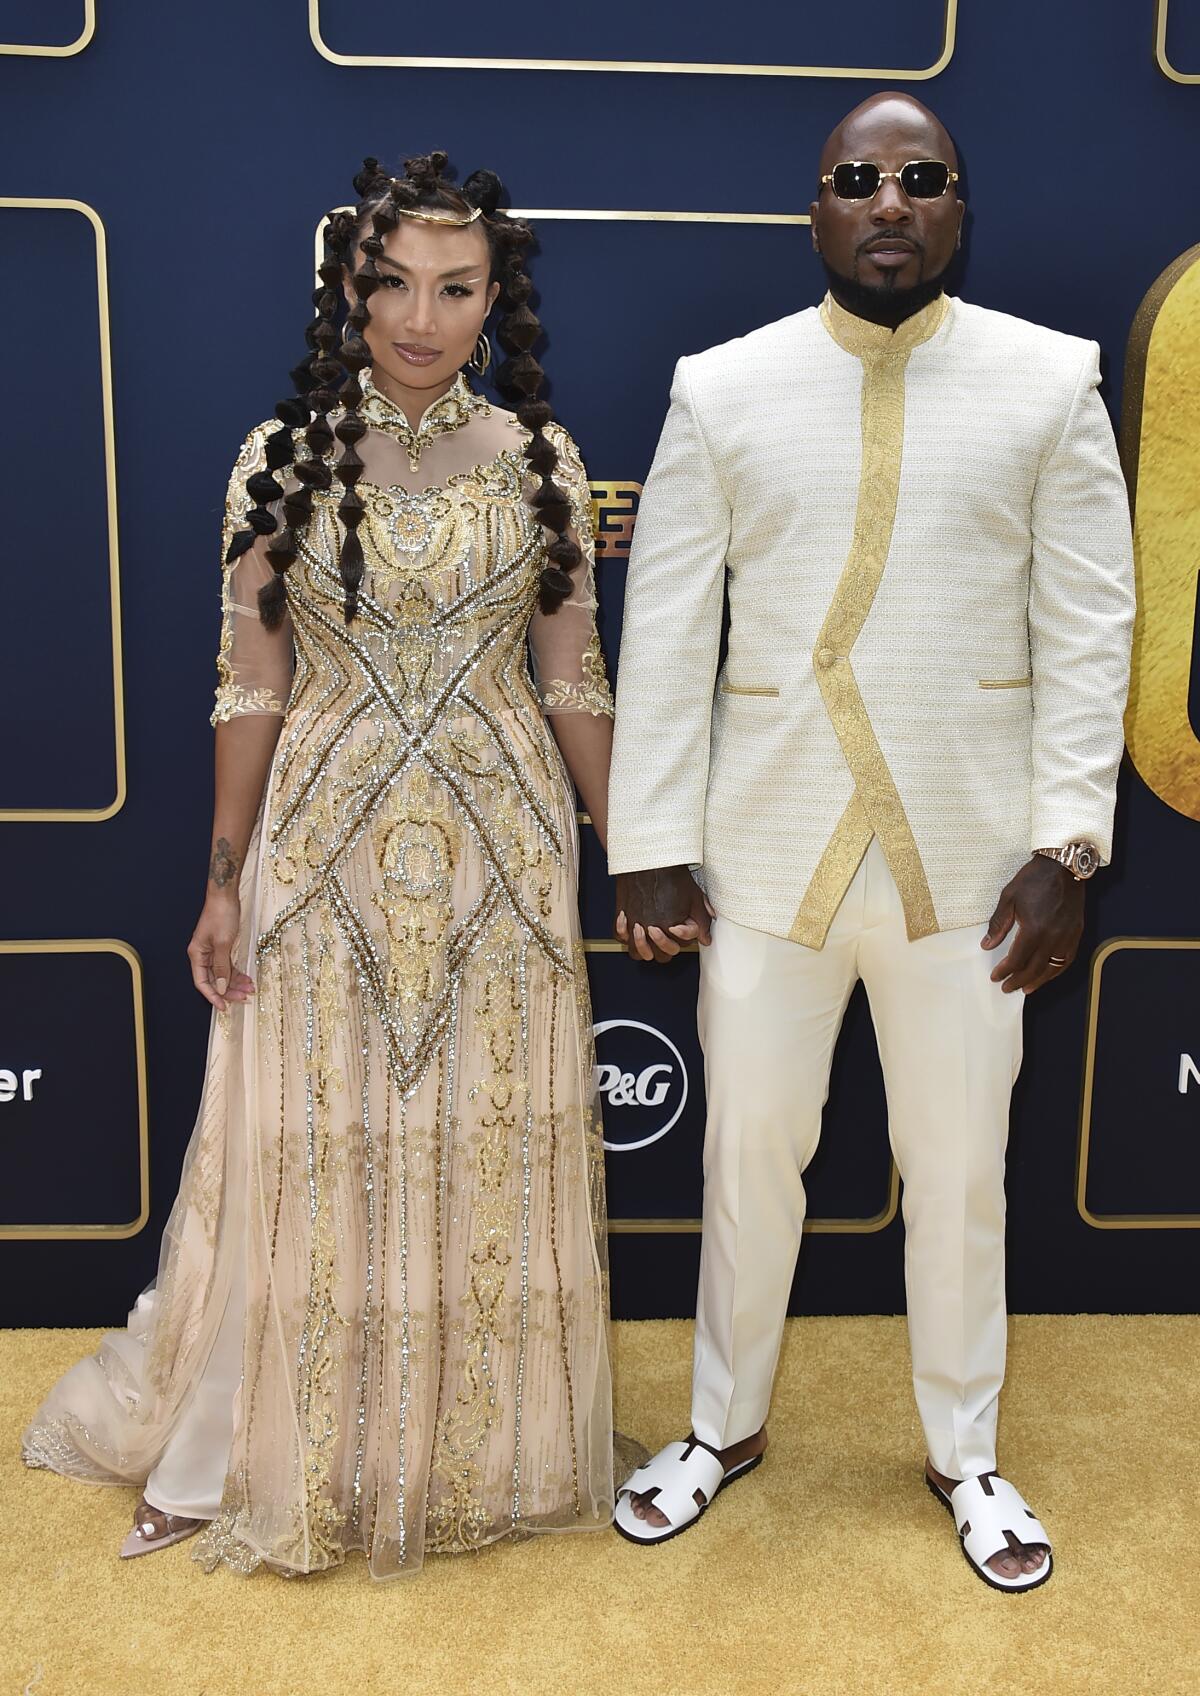 Jeannie Mai Jenkins in intricate gold gown holding hands with Jeezy in a white tunic, pants and sandals